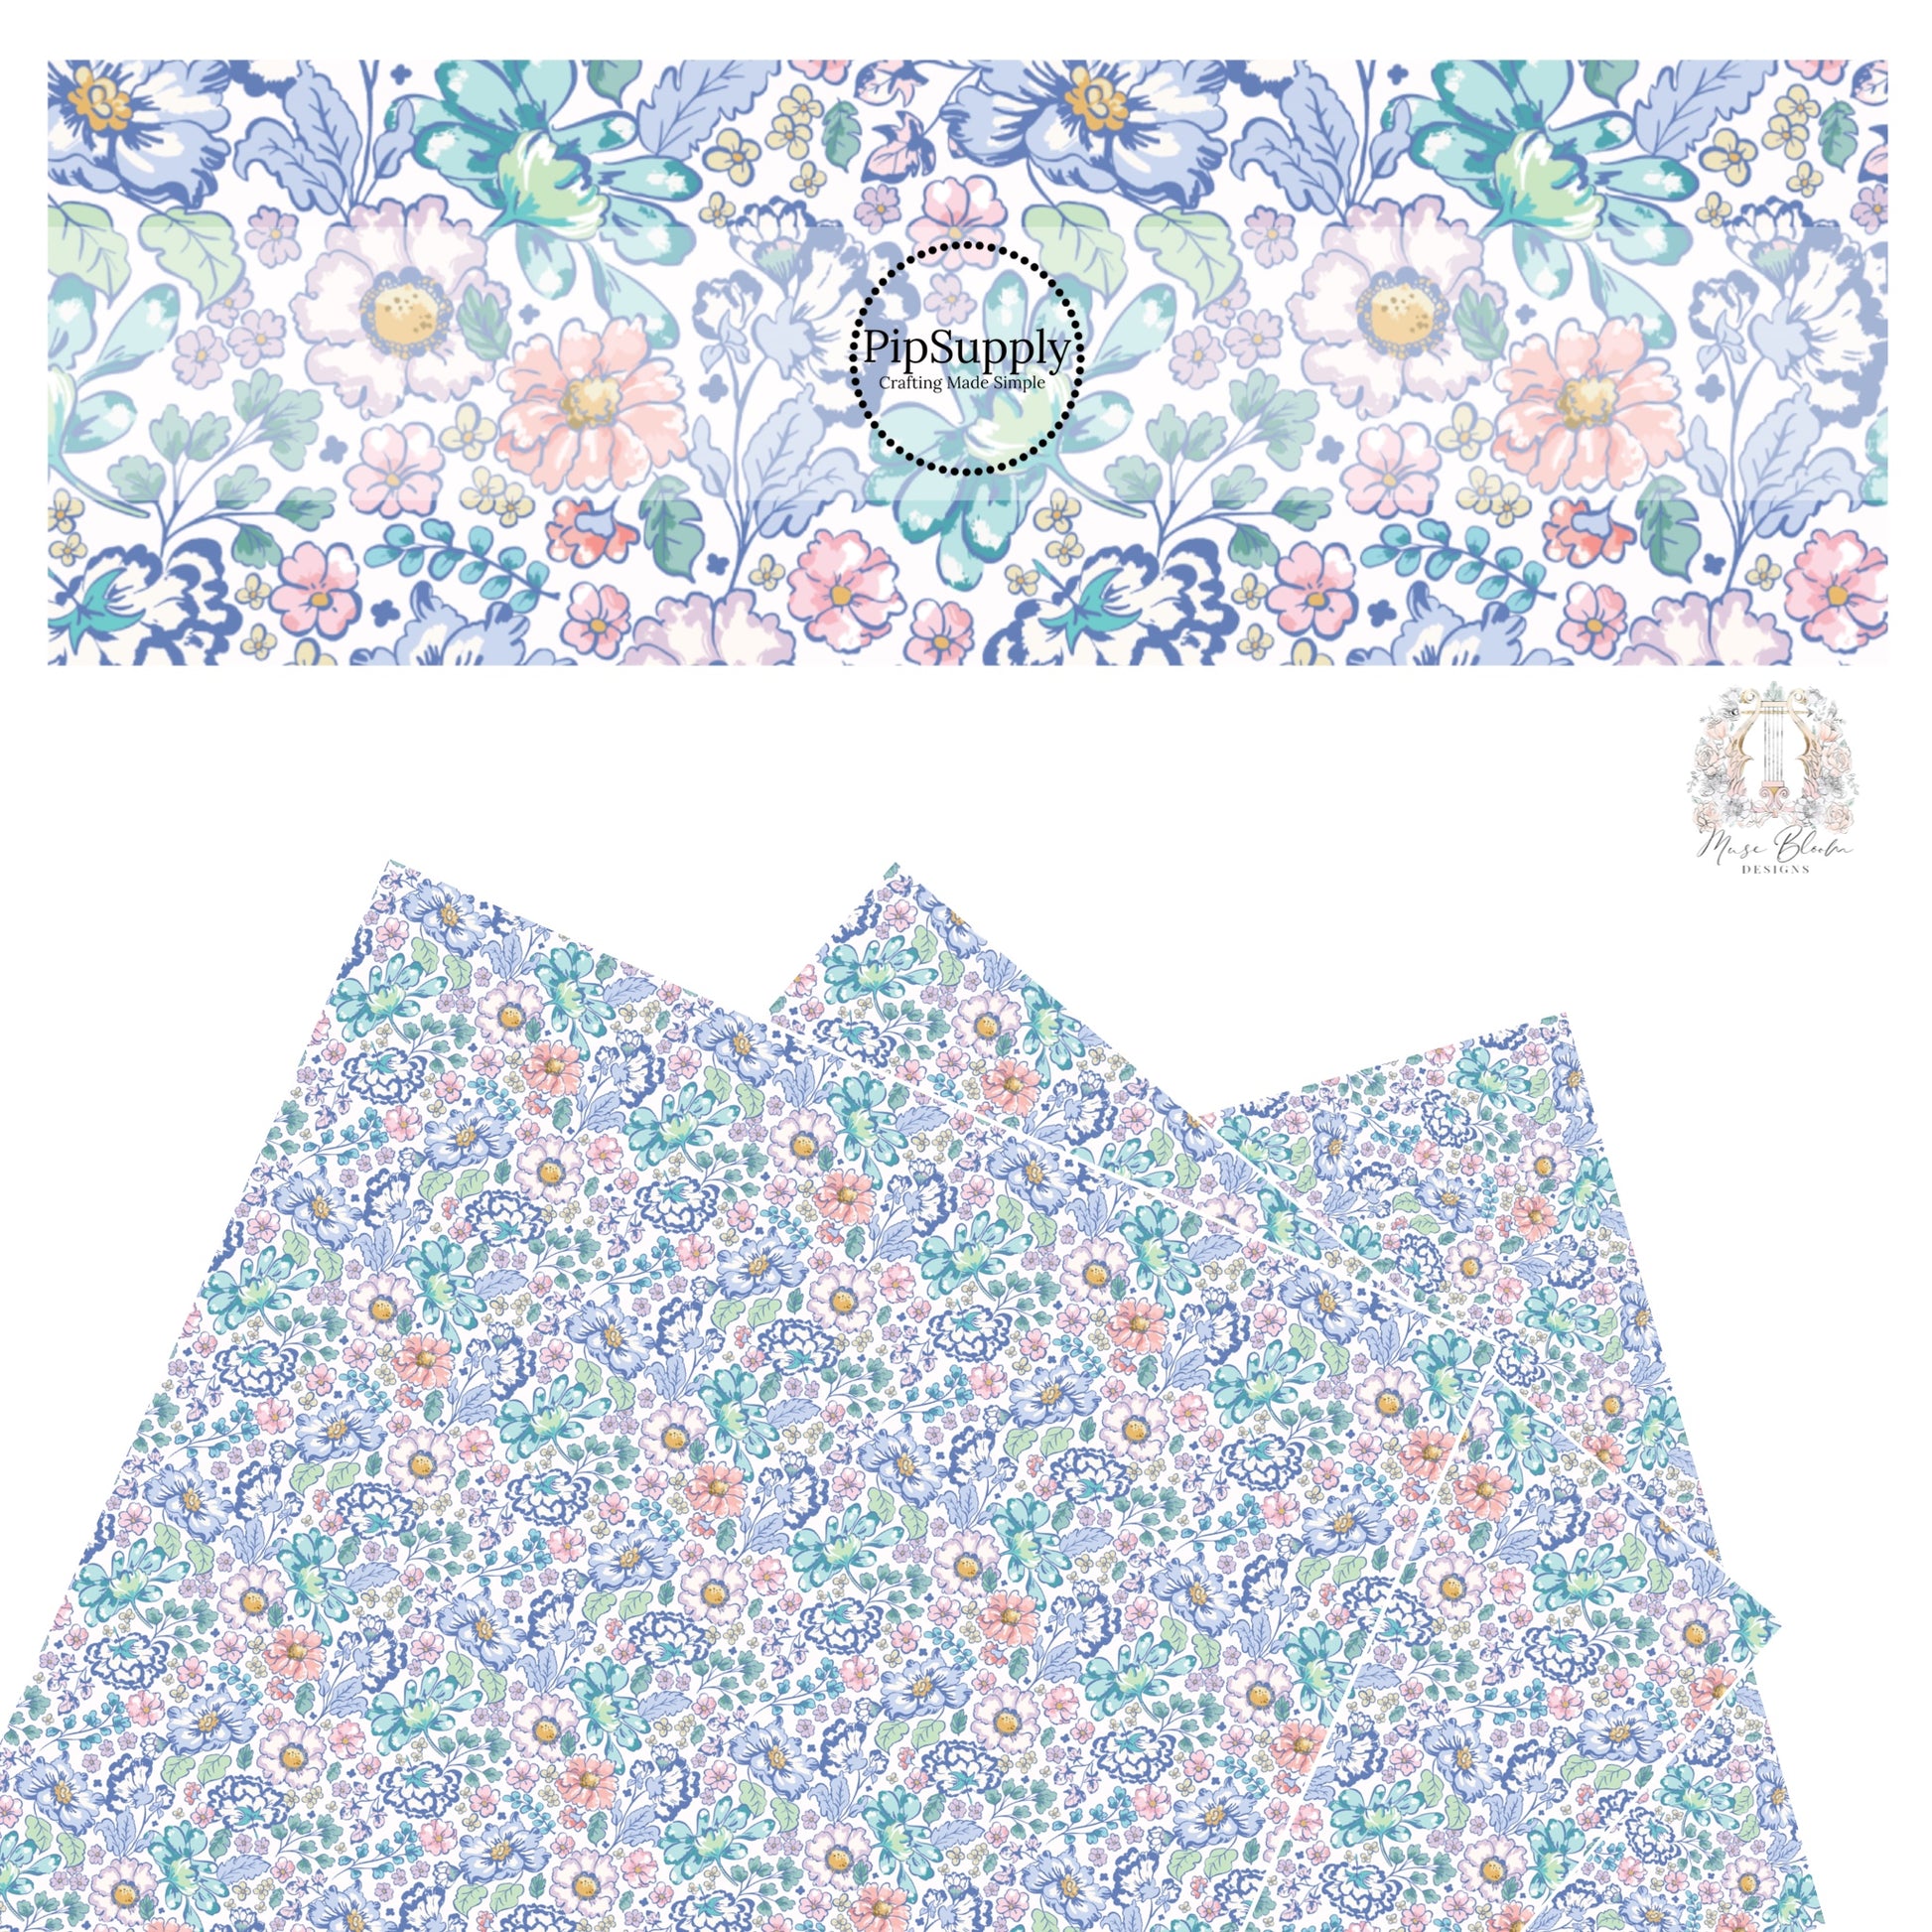 These floral themed cream faux leather sheets contain the following design elements: navy blue, light blue, teal, cream, light pink, yellow, and aqua flowers on cream. 